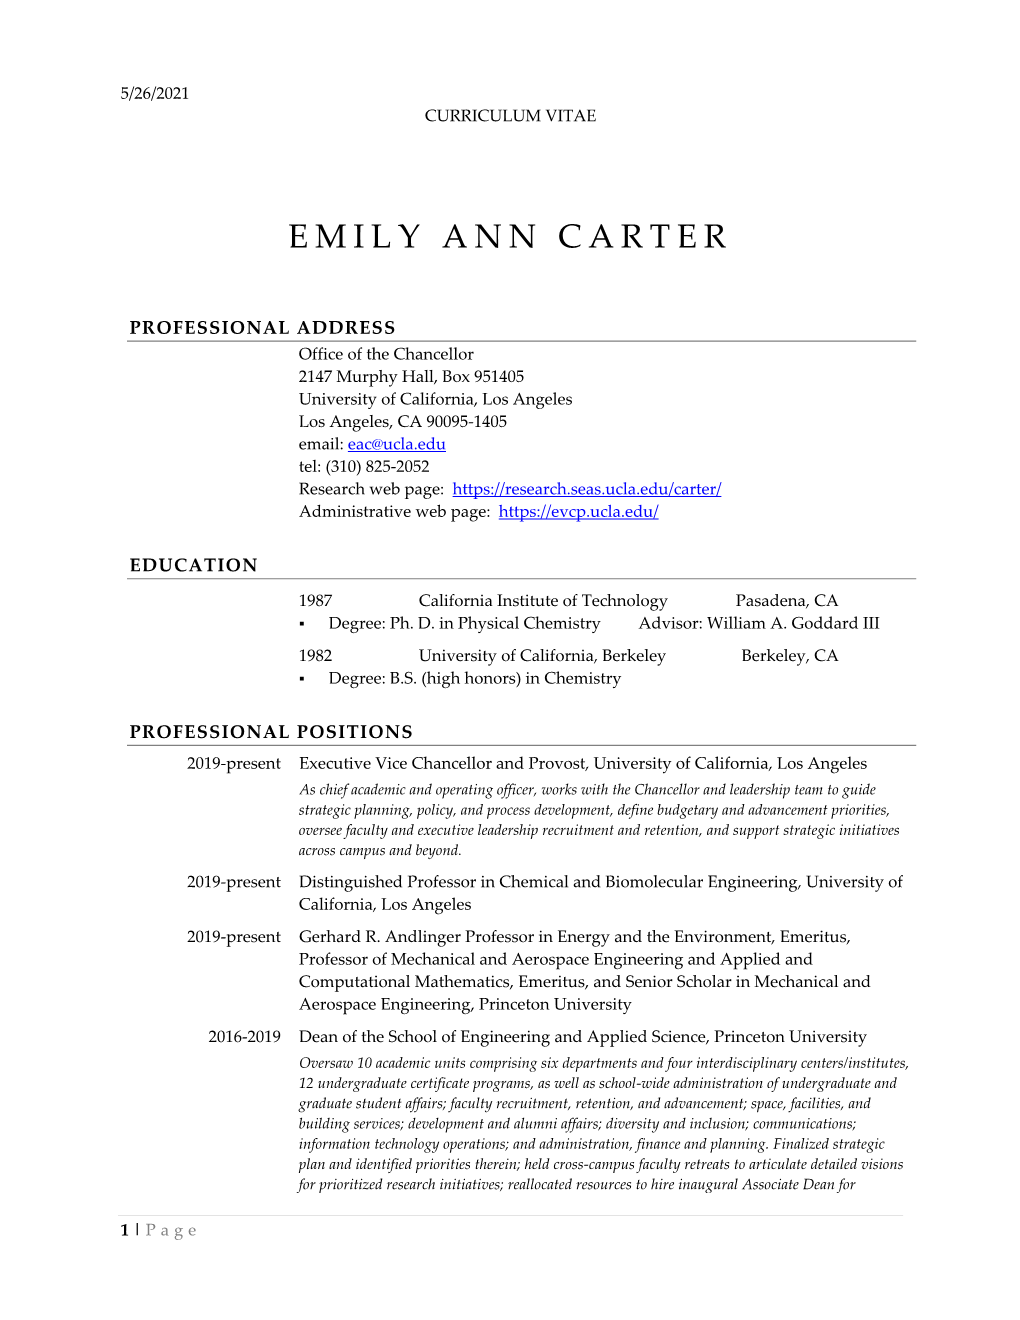 Emily A. Carter, “Potential-Functional Embedding Theory for Molecules and Materials,” J